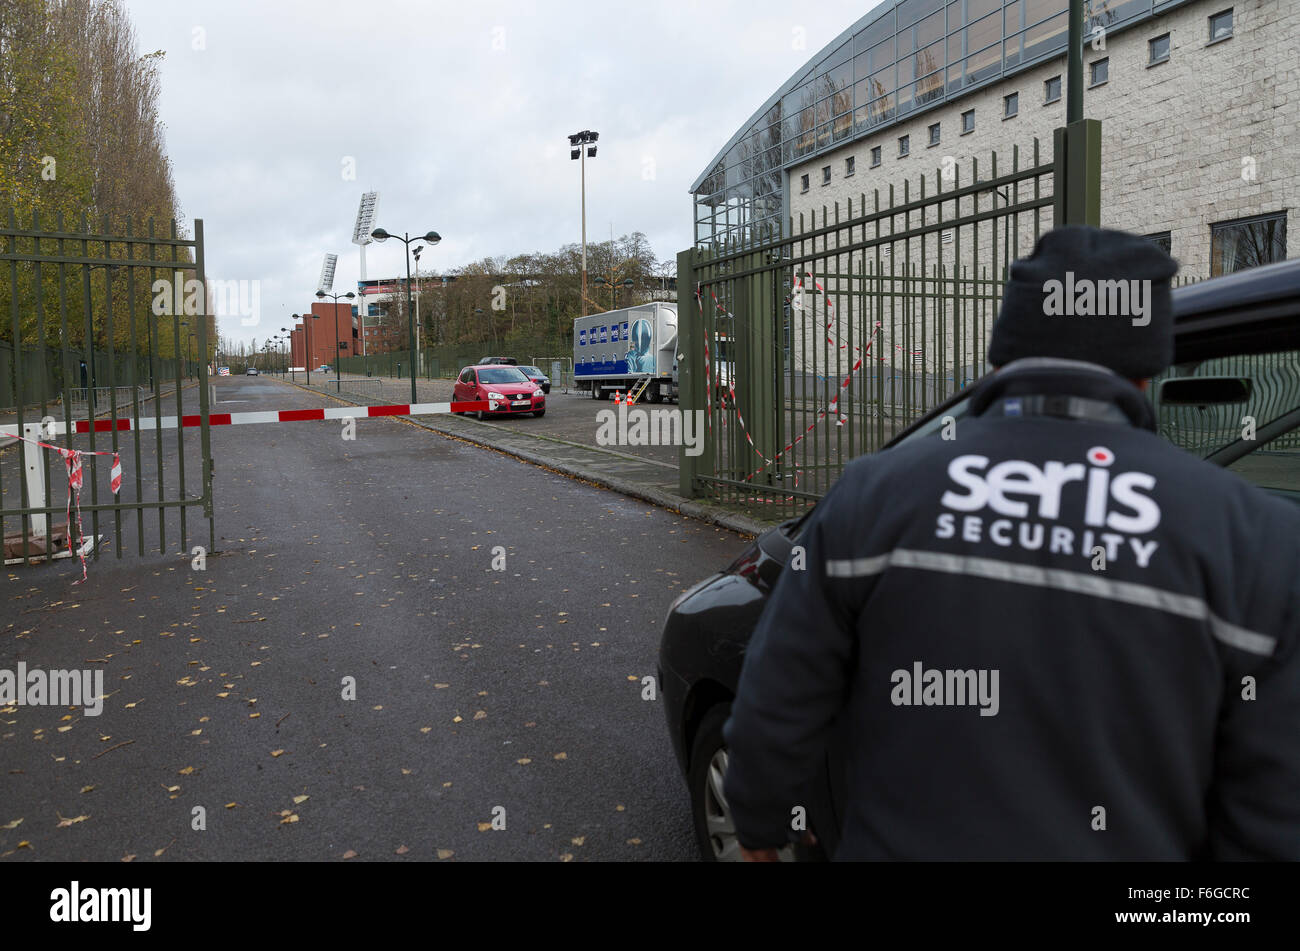 Brussels, Belgium. 17th Nov, 2015. Emplyoees of a security service stands at an entrance gate of the Roi Baudouin stadium in Brussels, Belgium, 17 November 2015. A friendly soccer match between Belgium and Spain was due to be played at the stadium on Tuesday but was cancelled due to security concerns following the Paris terrorist attacks on 13 November. Photo: Thierry Monasse/dpa/Alamy Live News Stock Photo